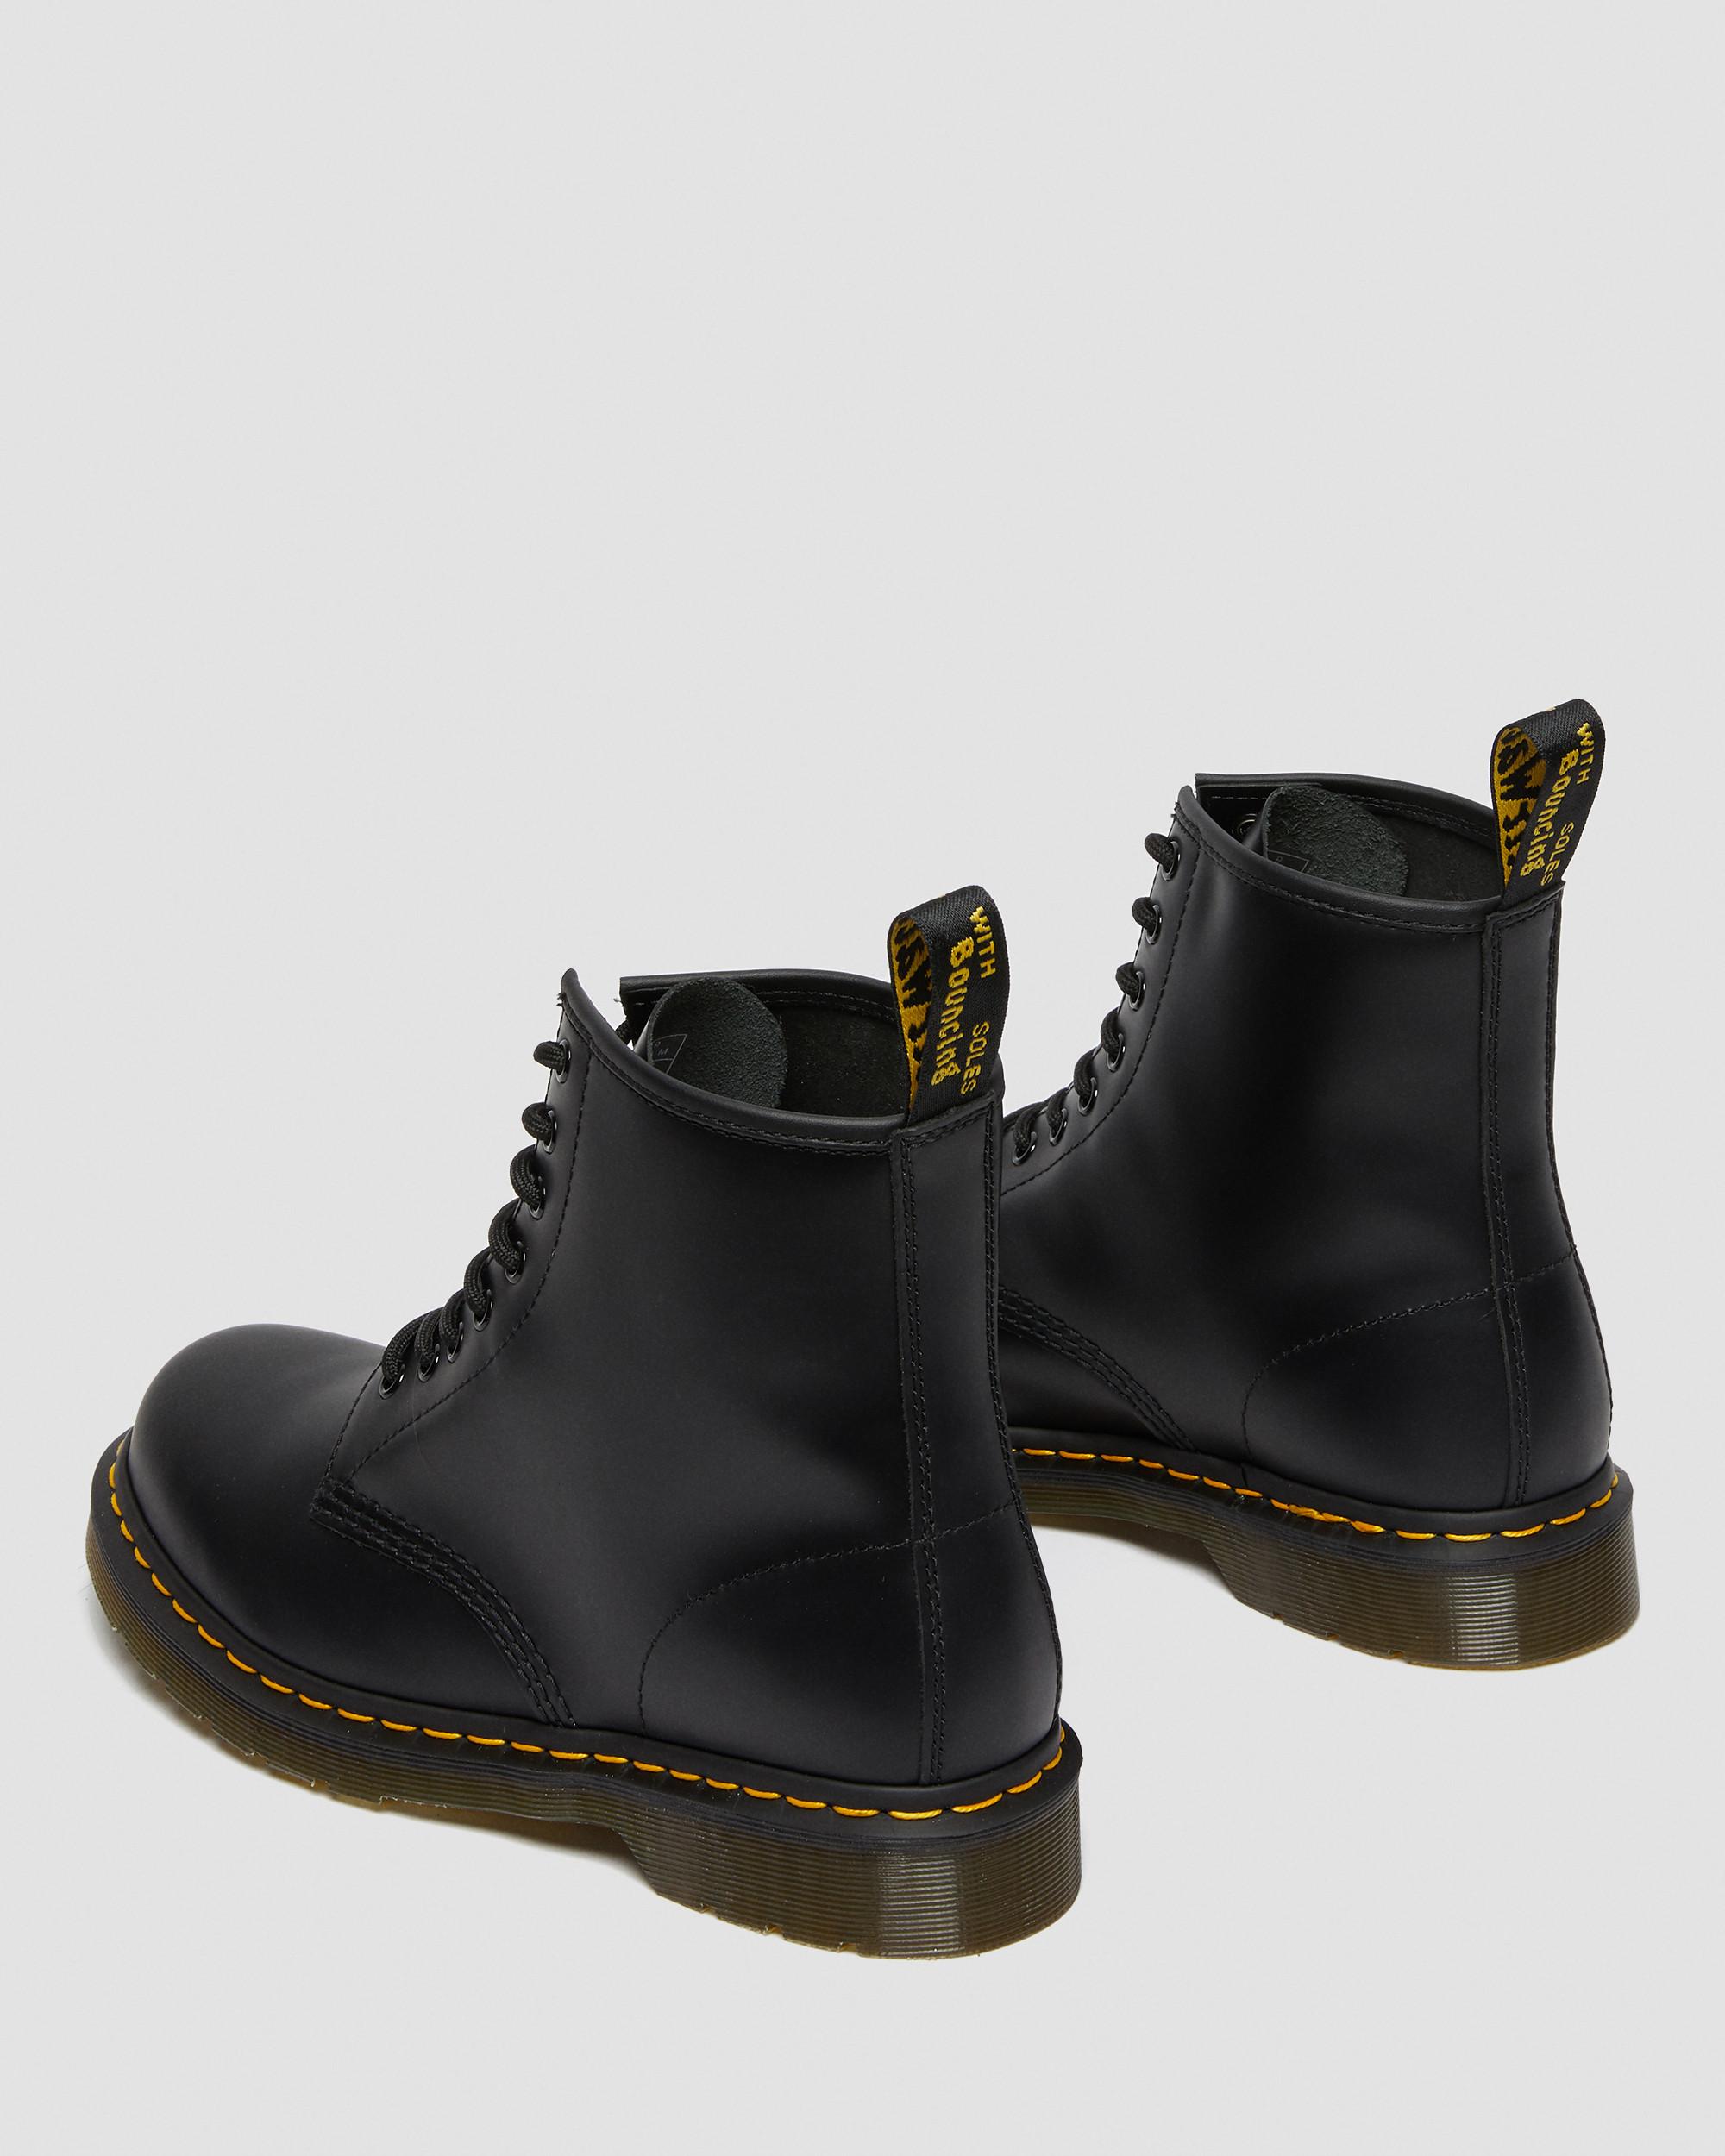 Up Boots Lace Dr. 1460 in Smooth | Martens Leather Black